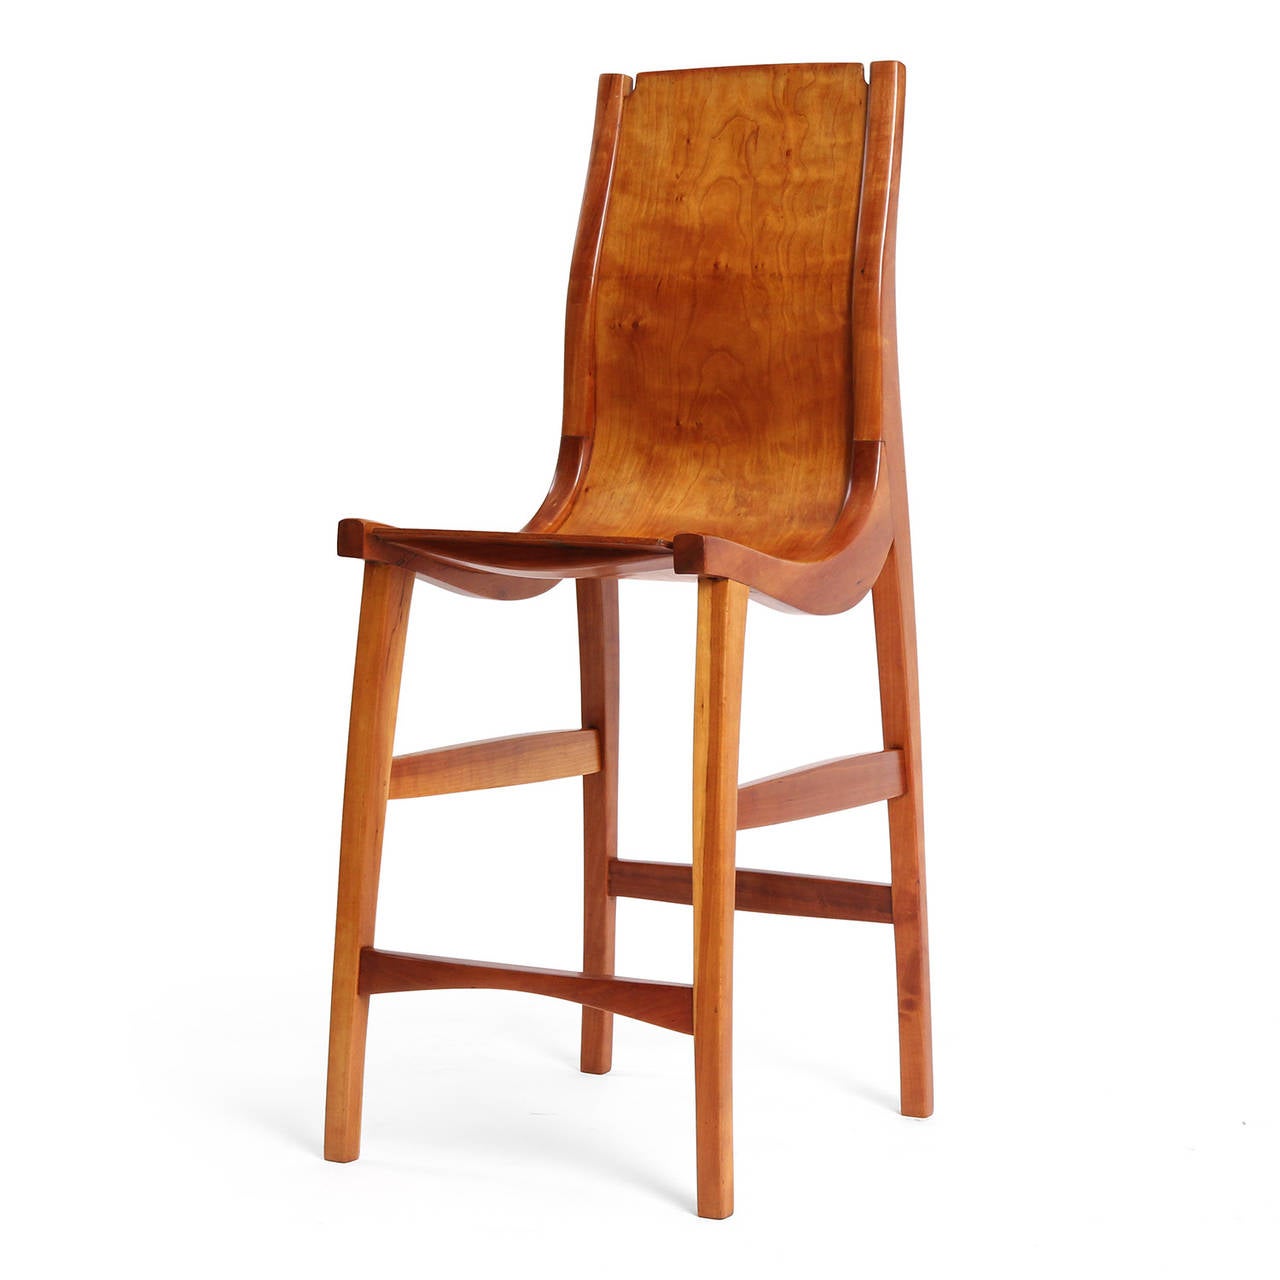 An excellent and unusual set of two (2) American craftsman style tall chairs with a sinuous sculptural form, designed by Jere Osgood. Solid maple seat and back on a laminate platform. Made in the USA, circa 1960s.